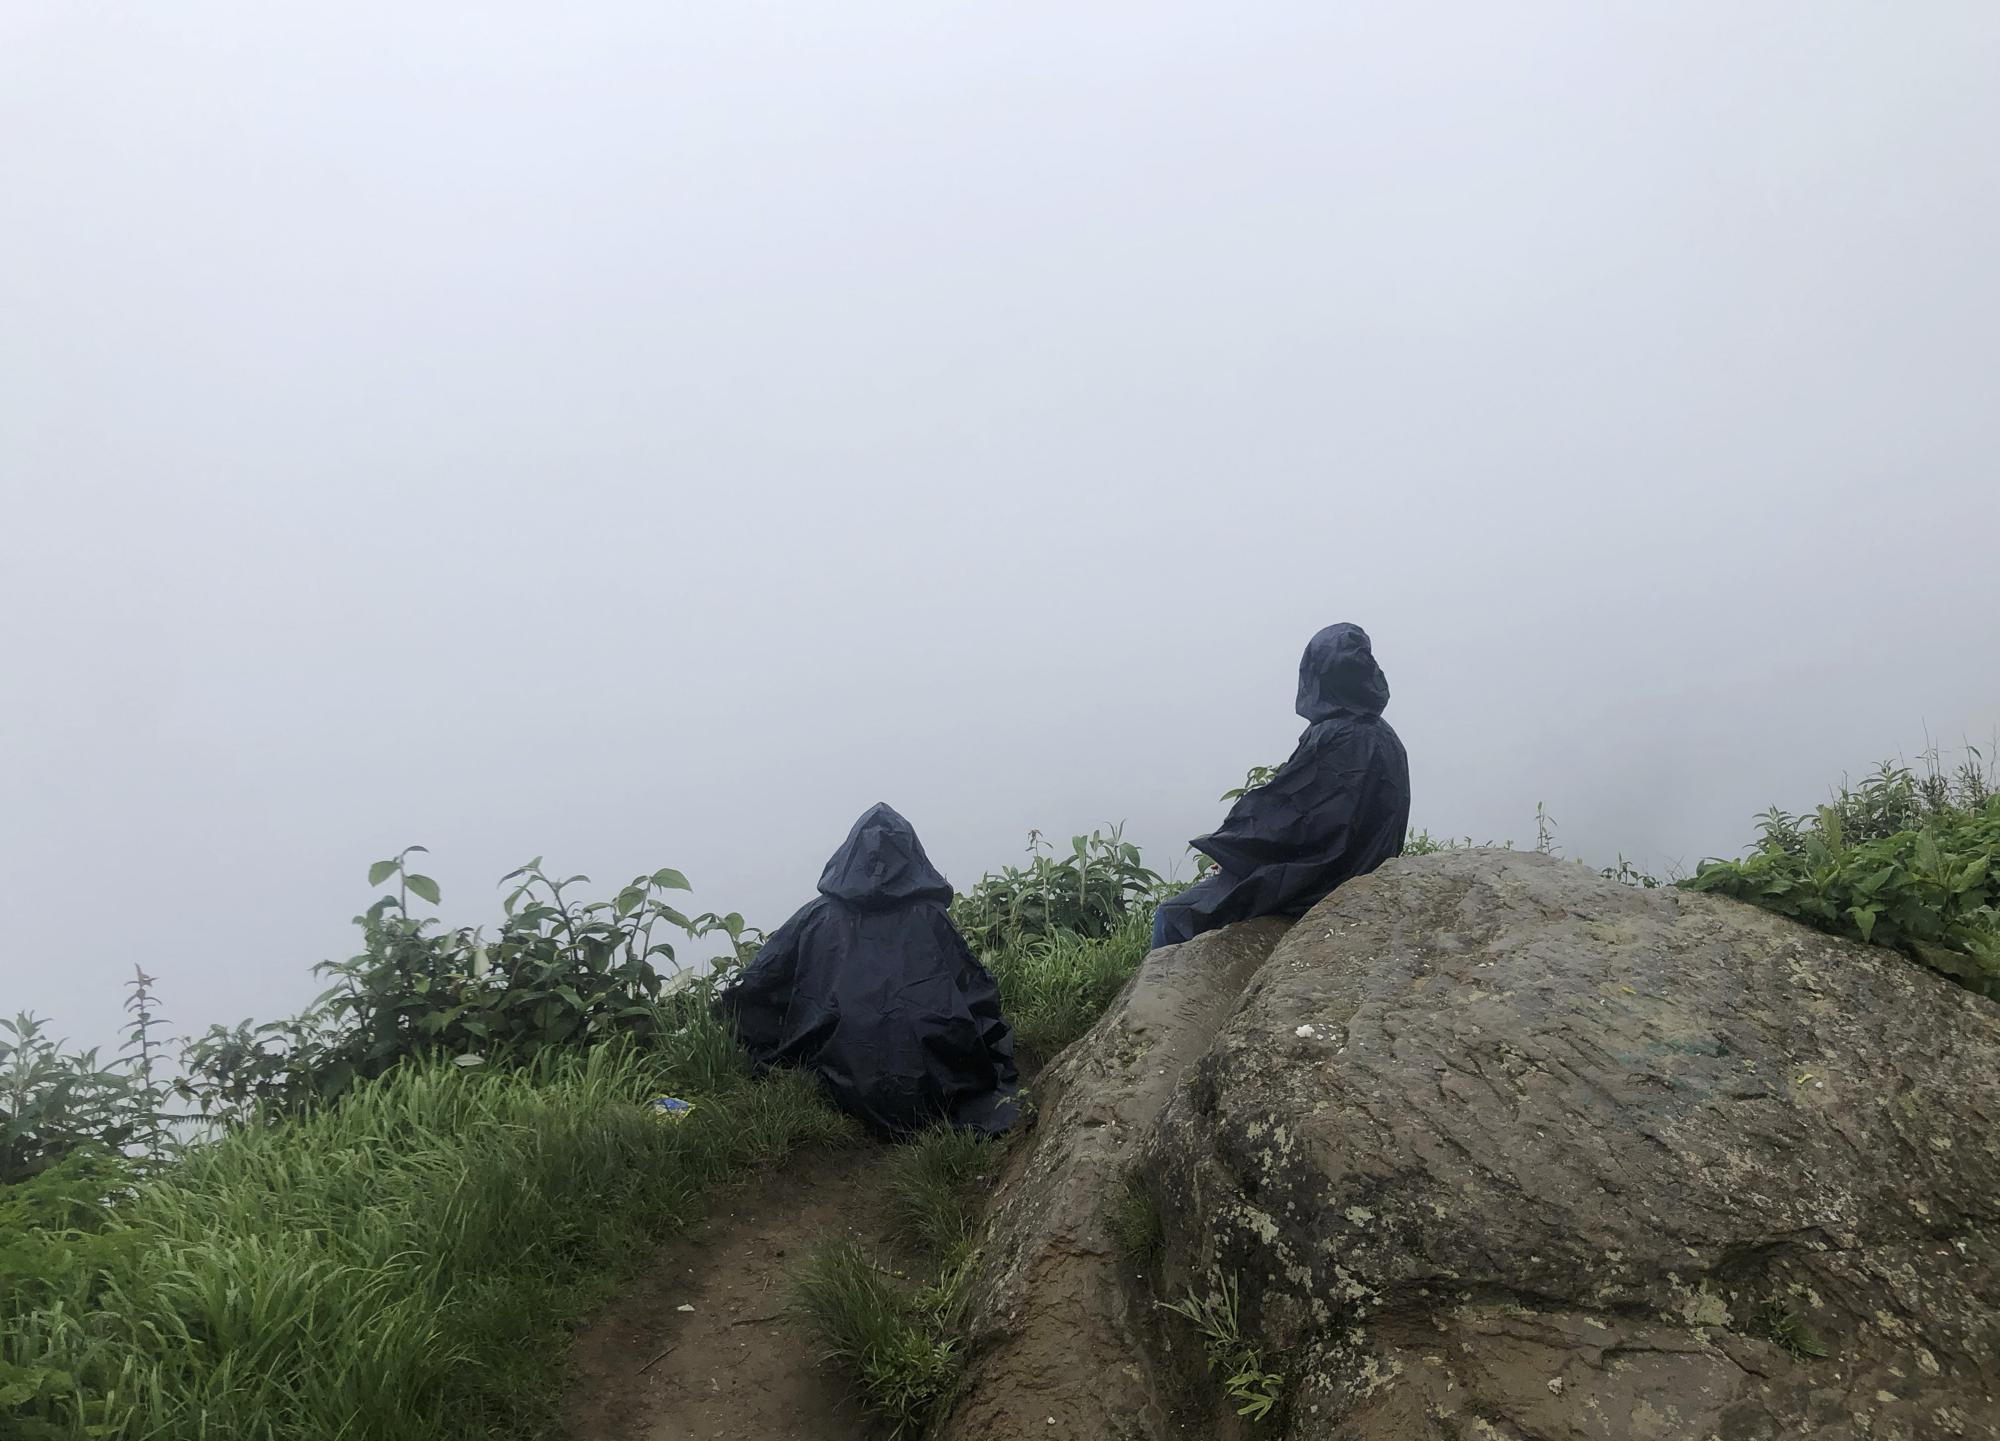 A mother and daughter look out into the clouds at the summit near Dzukou valley, along the Nagaland-Manipur state border, India, in this Monday, June 13, 2022 iPhone photo. "It was a tranquil moment at the end of a rainy and slippery climb. Both were transfixed, absorbed in the solitude of the clouds. I knew that in a moment more people would be joining them, so I quickly lifted my phone and took this frame," wrote Arthur. (AP Photo/Yirmiyan Arthur)